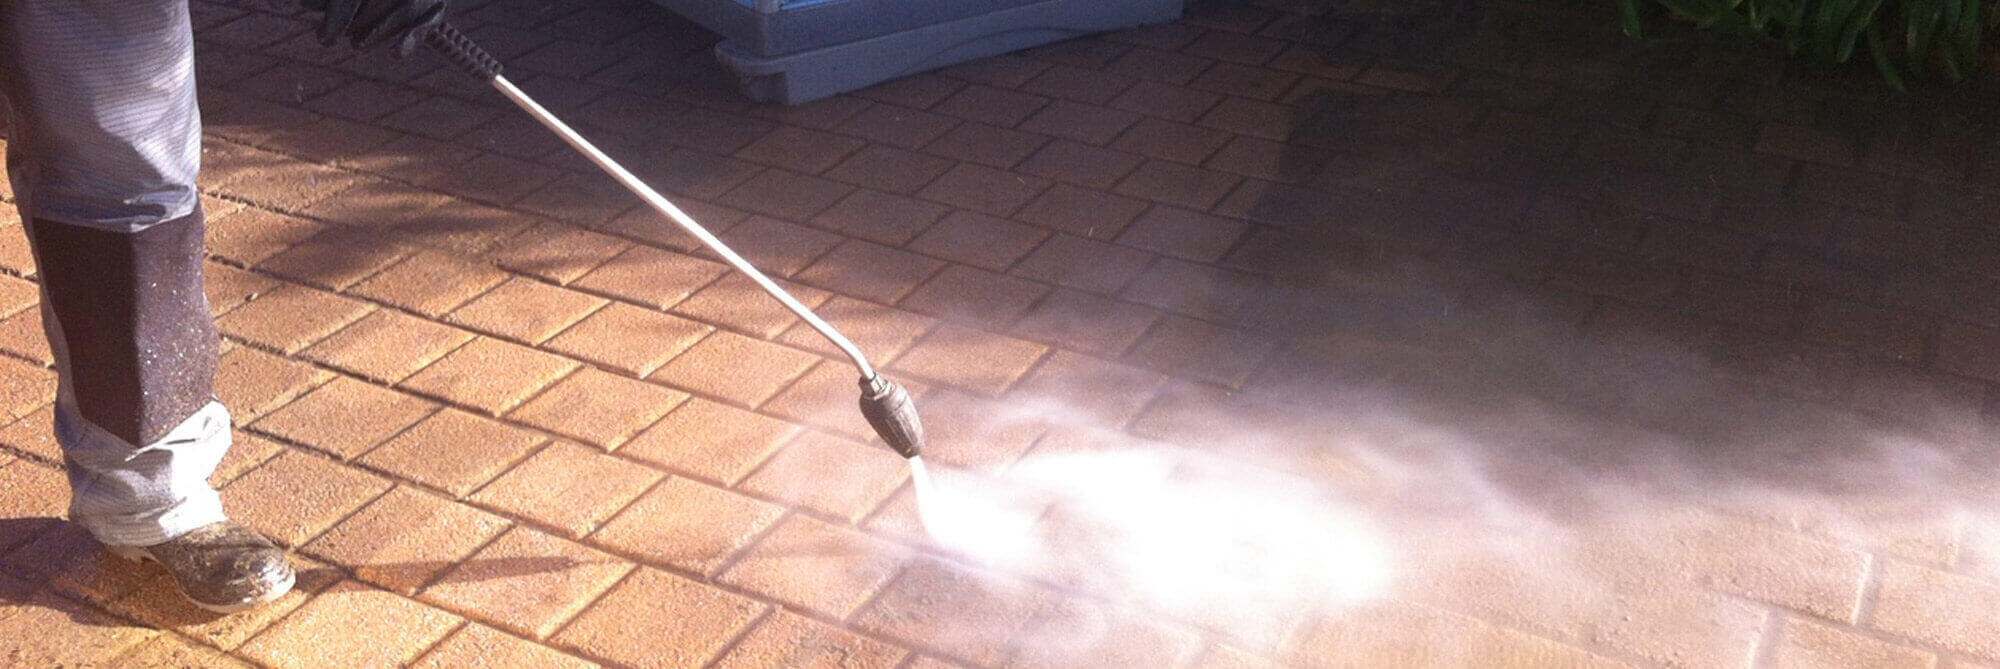 Tile Pressure Cleaning Perth